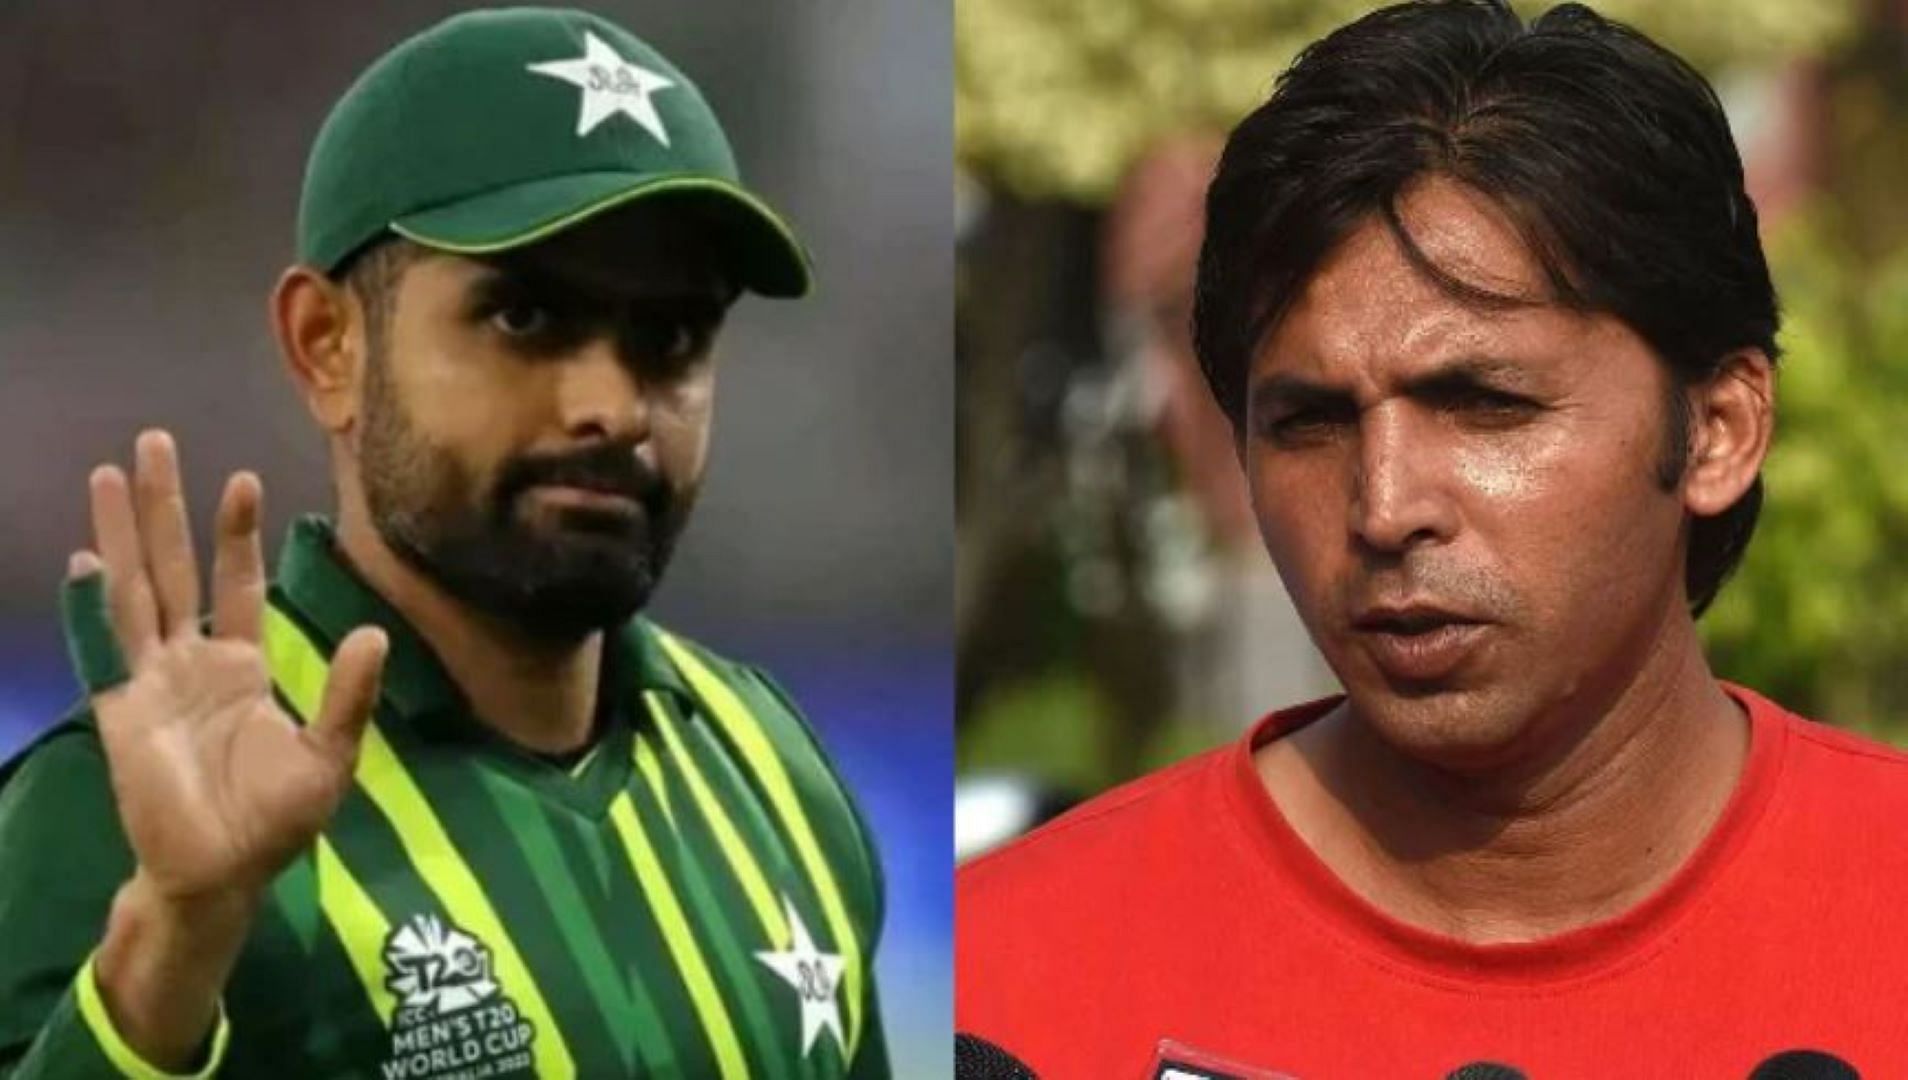 Mohammad Asif made critical remarks about the Pakistan skipper